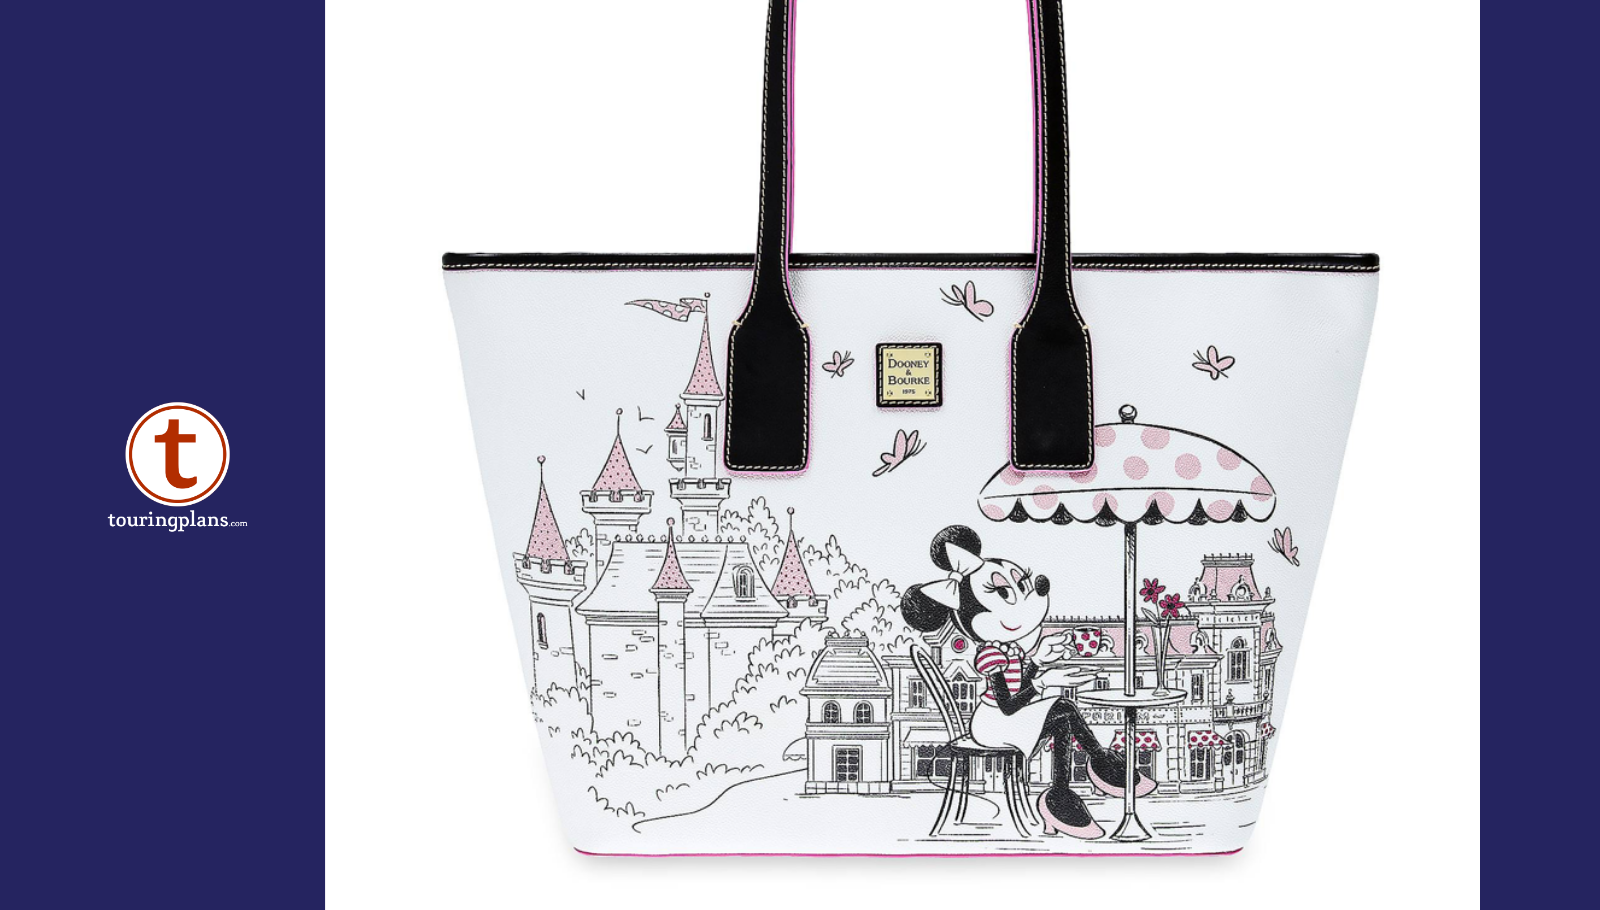 New 'The Aristocats' Dooney & Bourke Collection Released at Disneyland -  WDW News Today